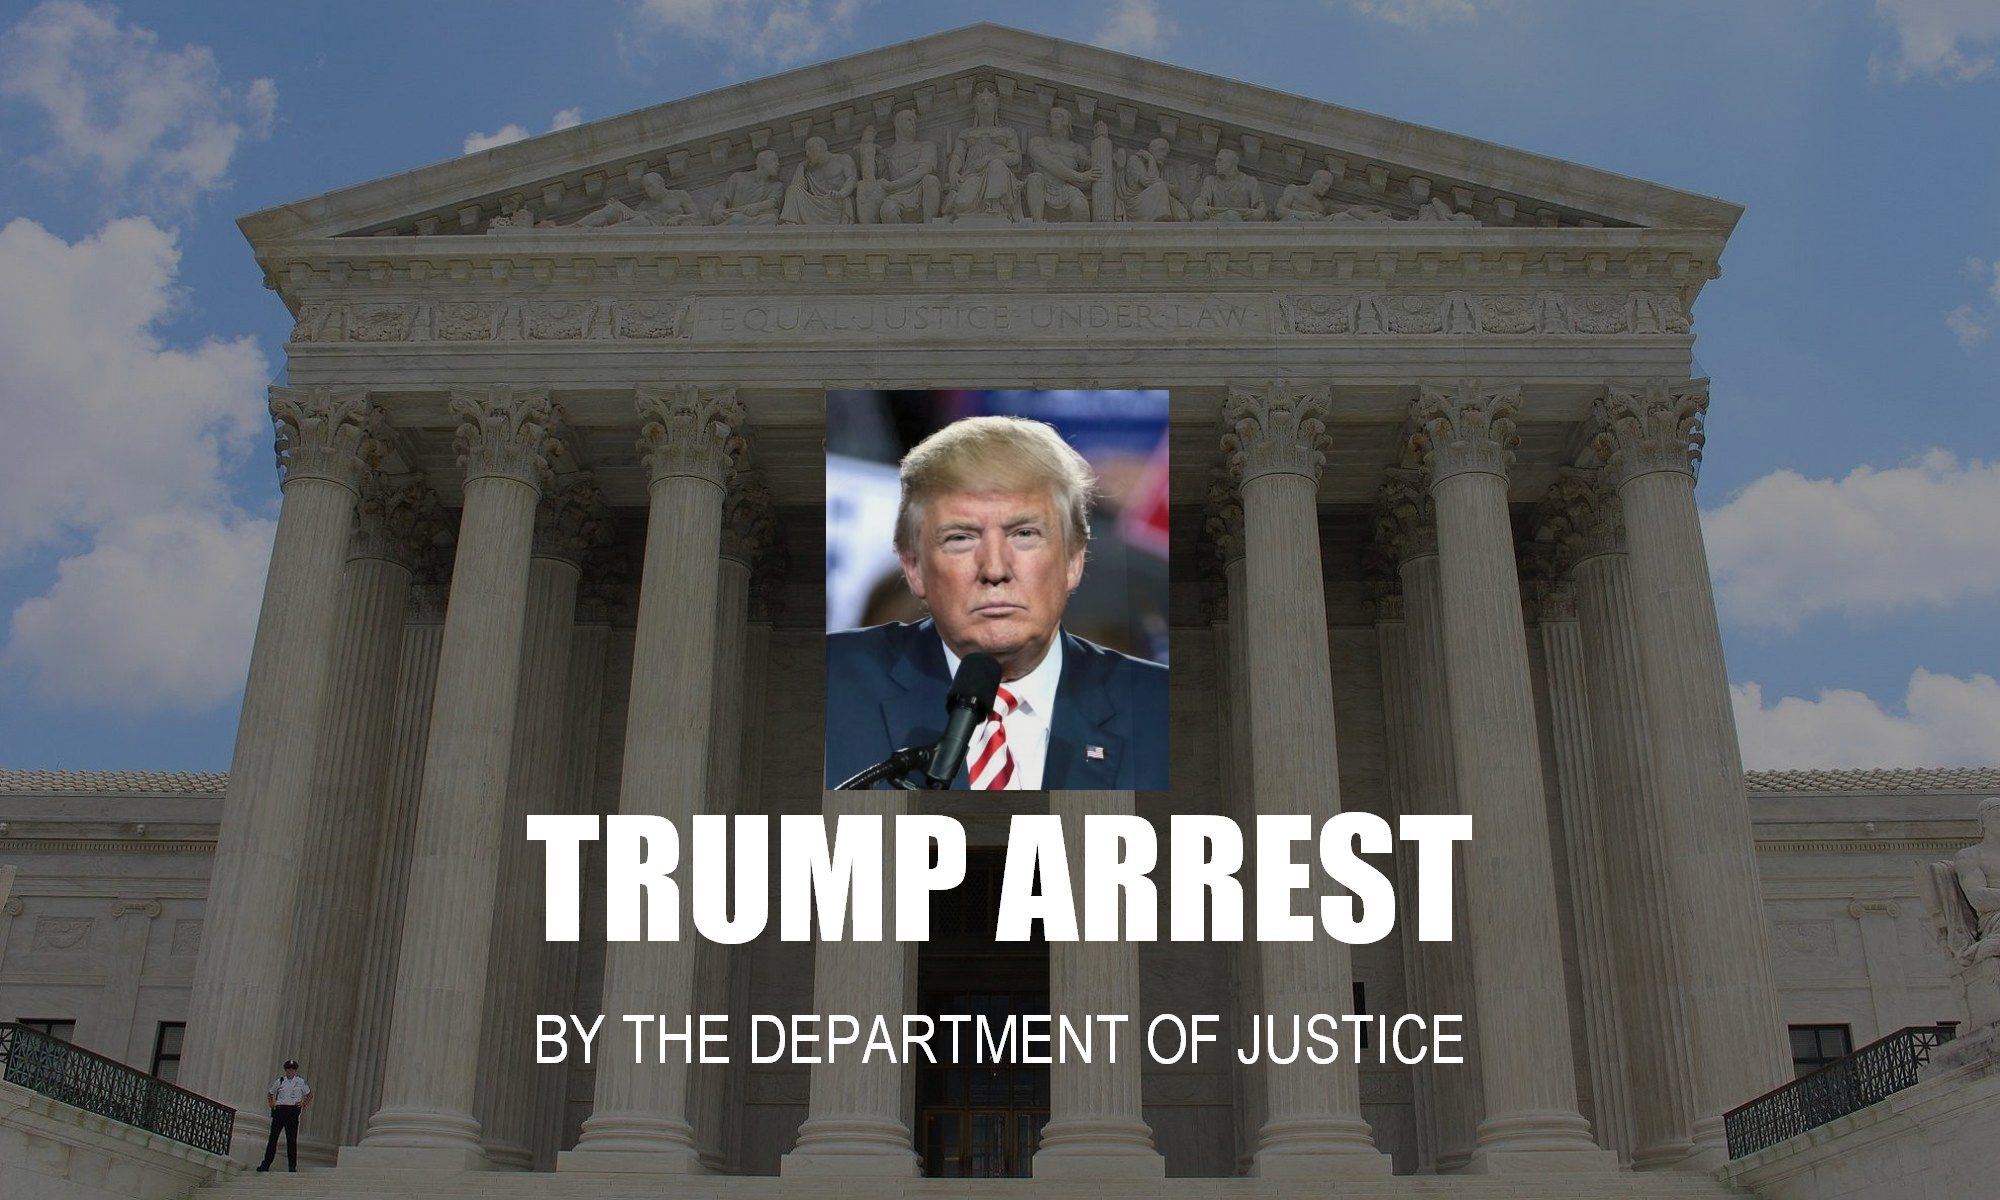 trump-arrest-was-criminal-charge-made-by-department-of-justice-for-donald-when-it-will-happen-how-what-for